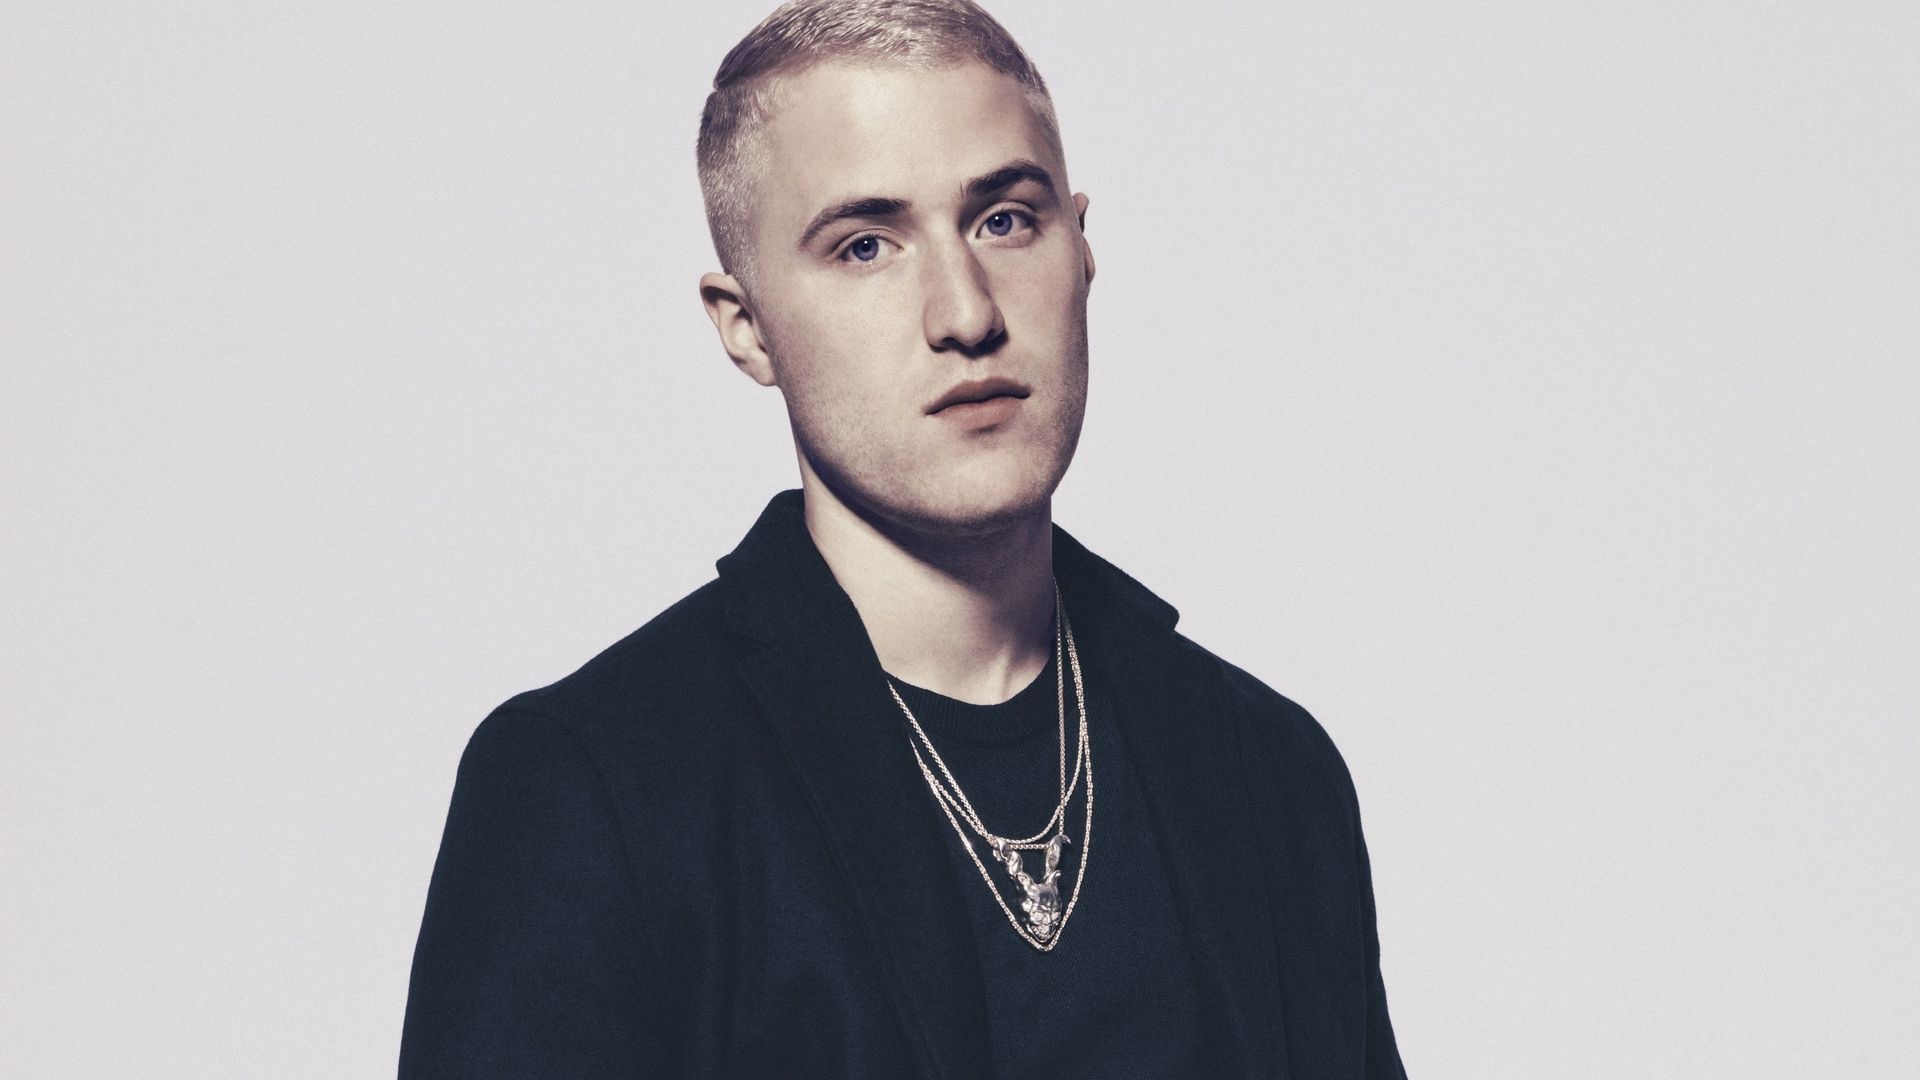 Mike Posner Wallpapers posted by Ryan Sellers 1920x1080